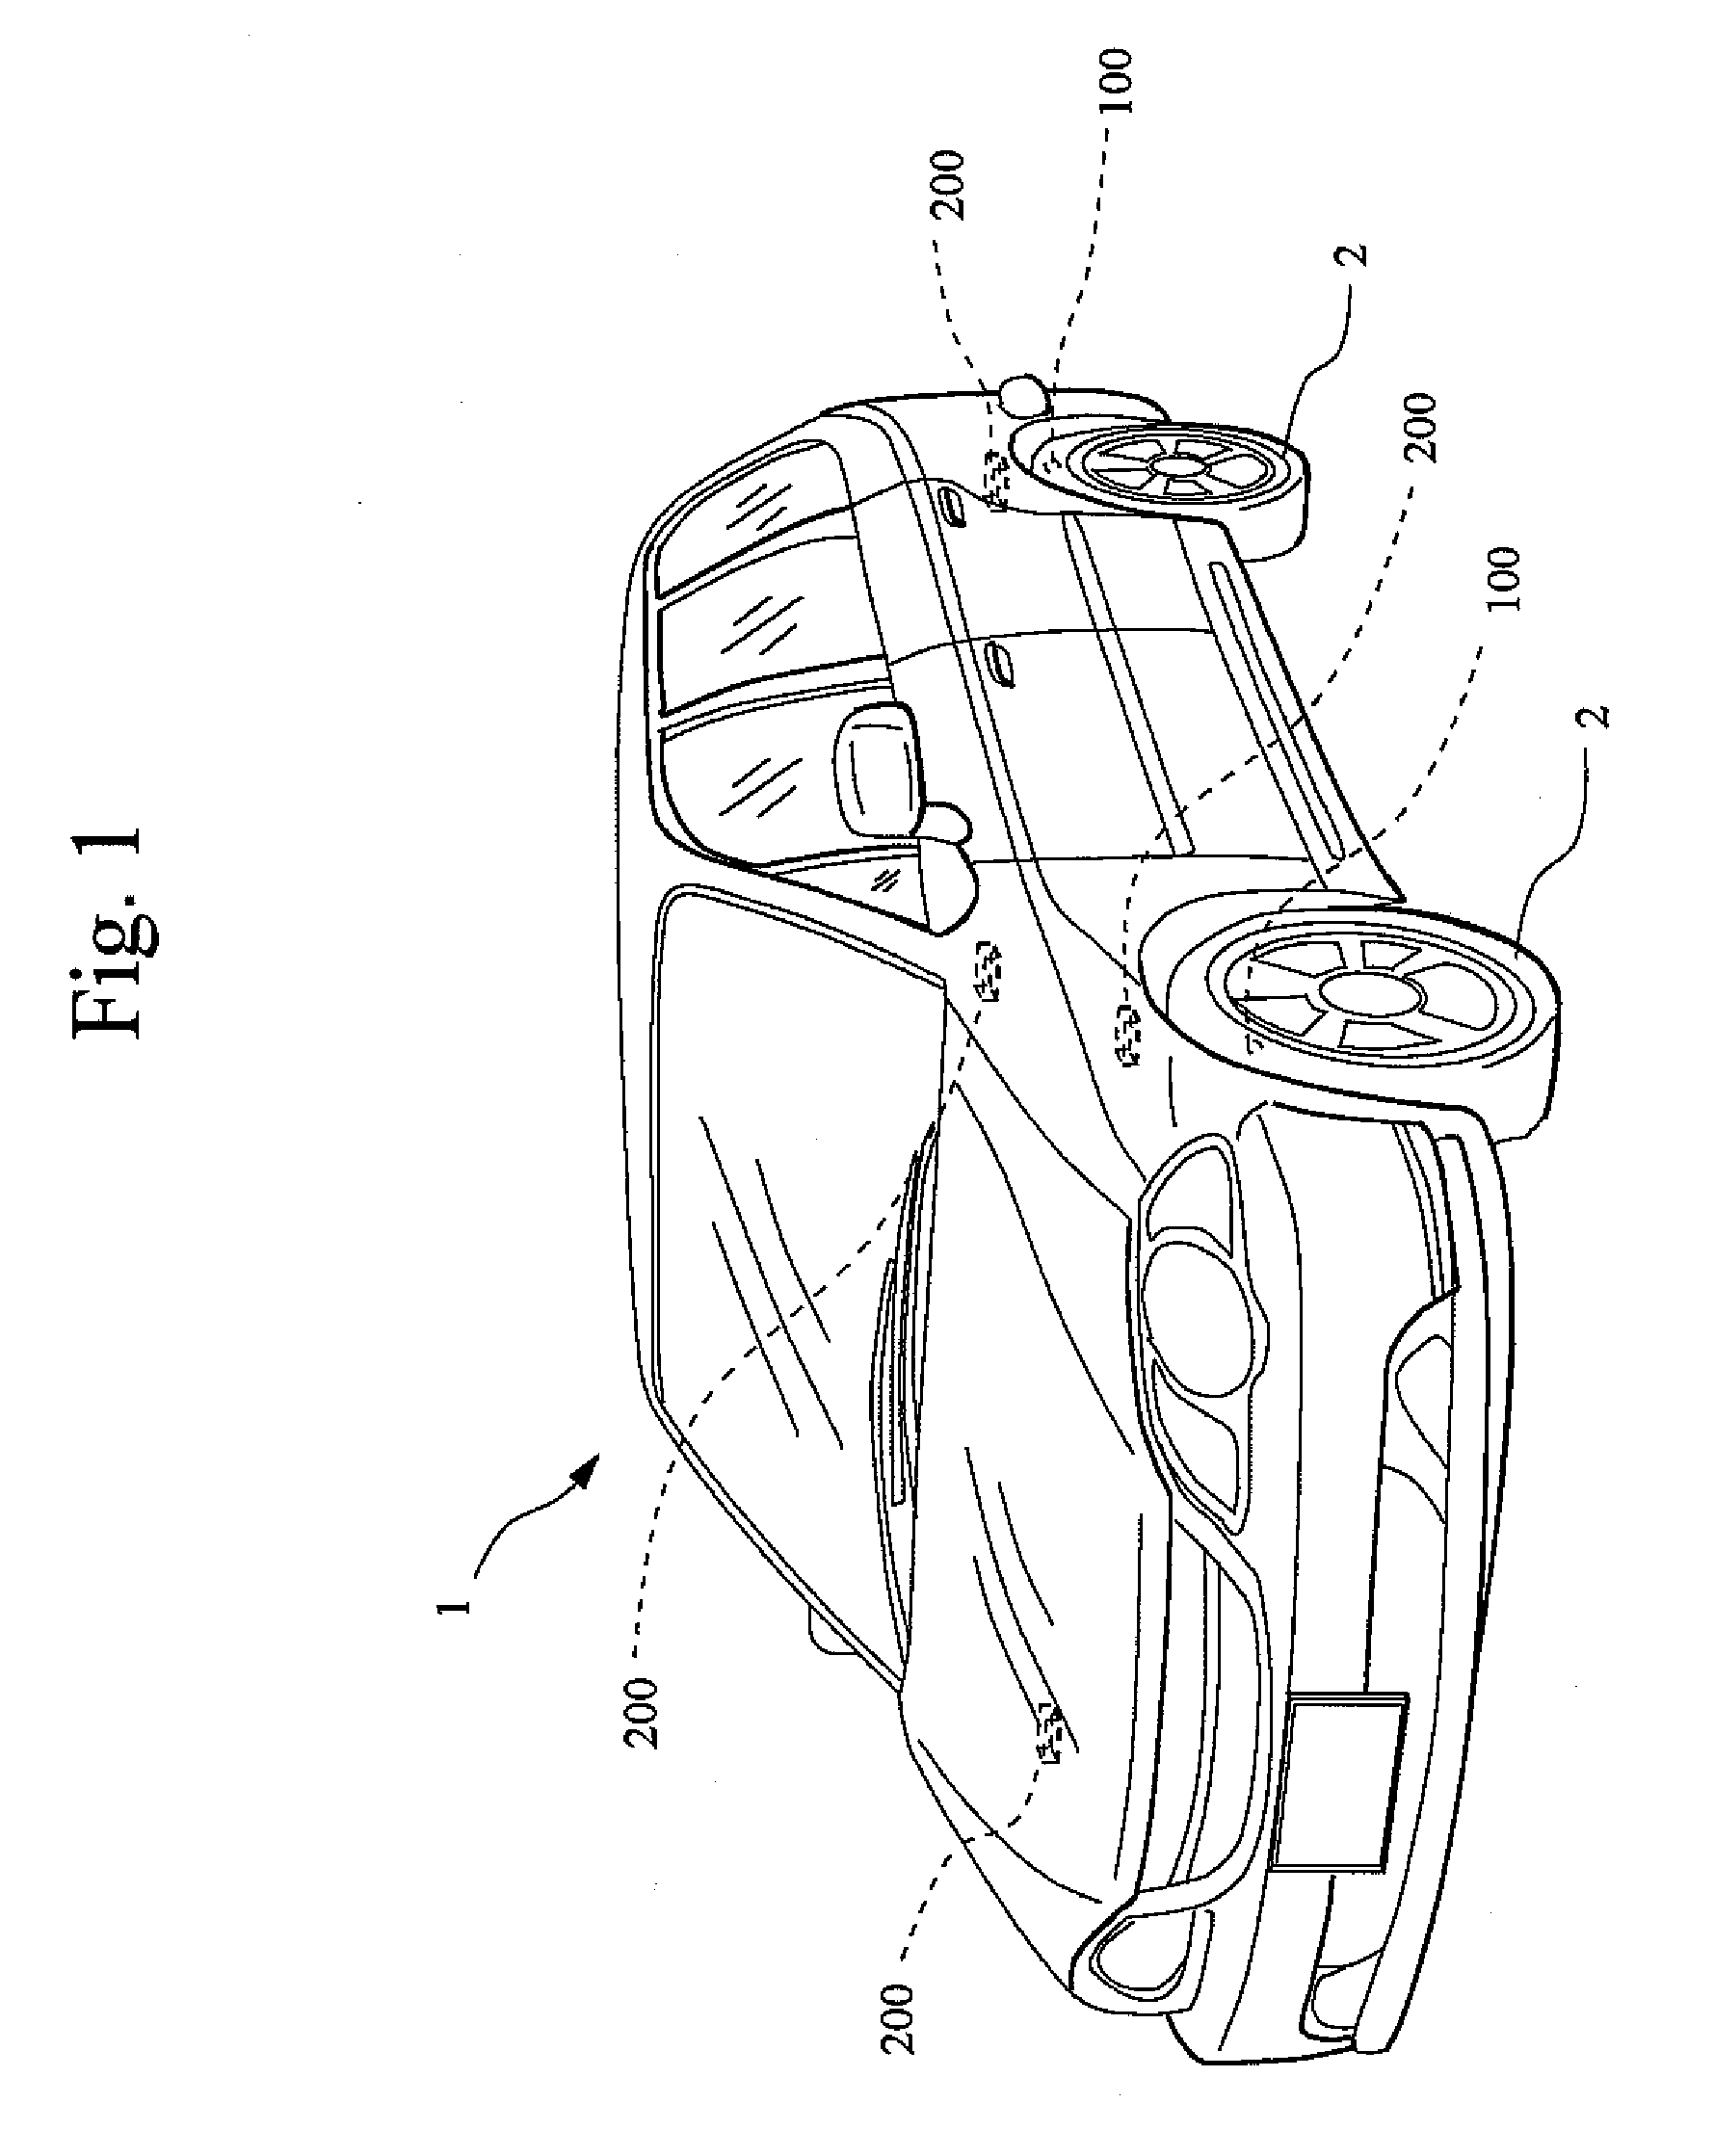 Vehicle Drive Control System and Sensor Unit and Tire